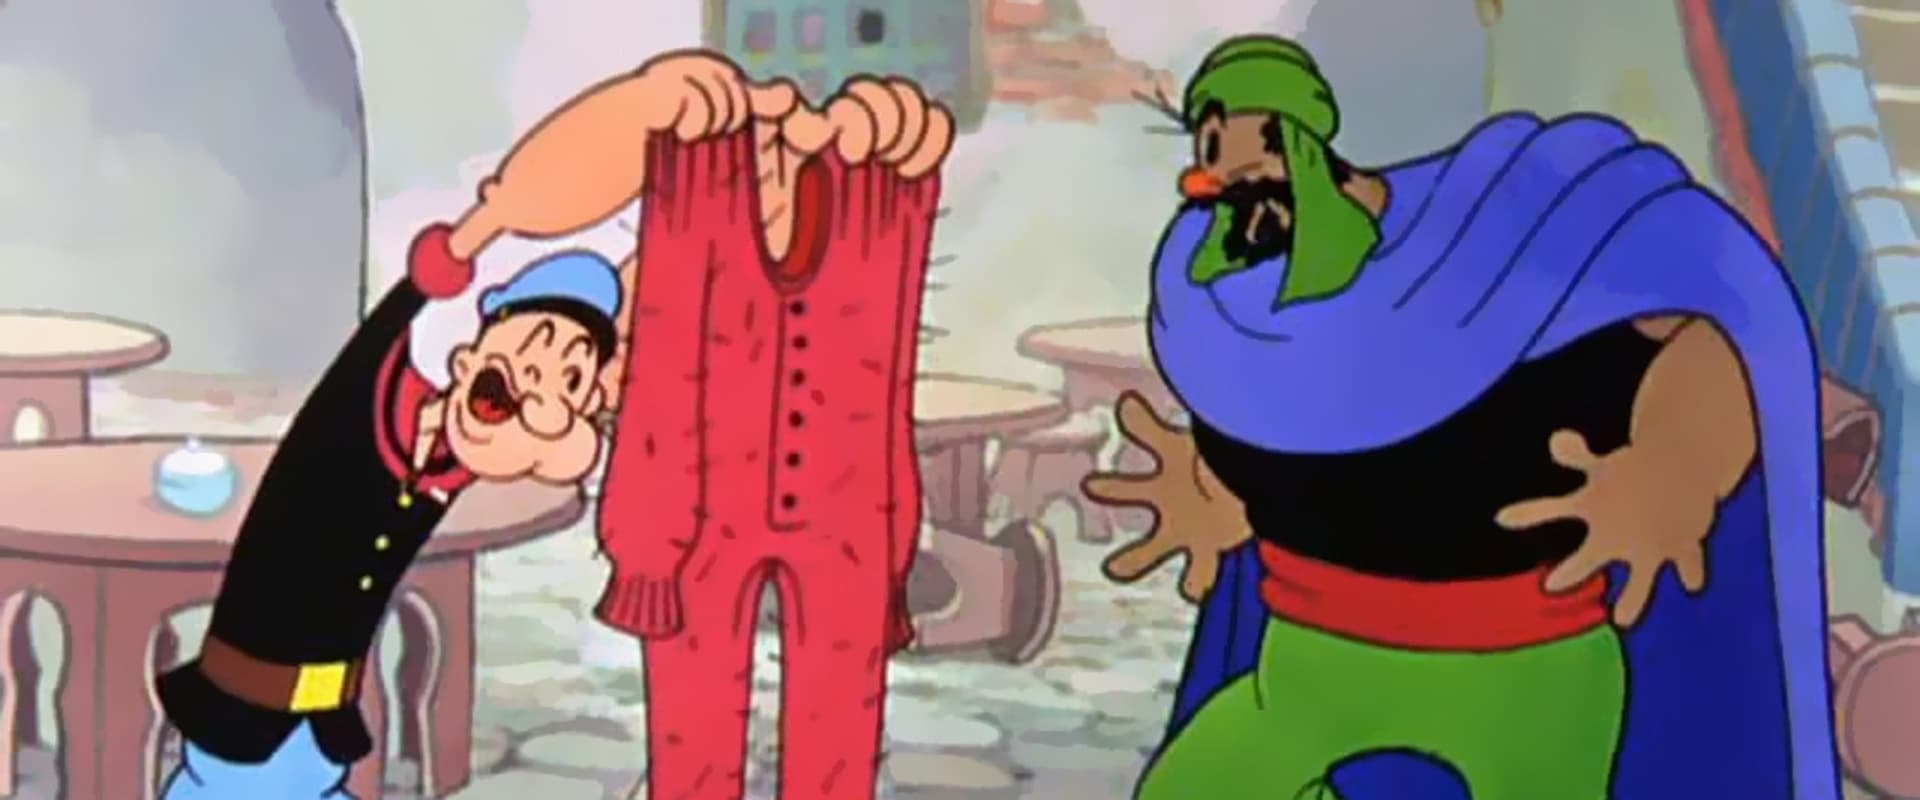 Popeye the Sailor Meets Ali Baba's Forty Thieves